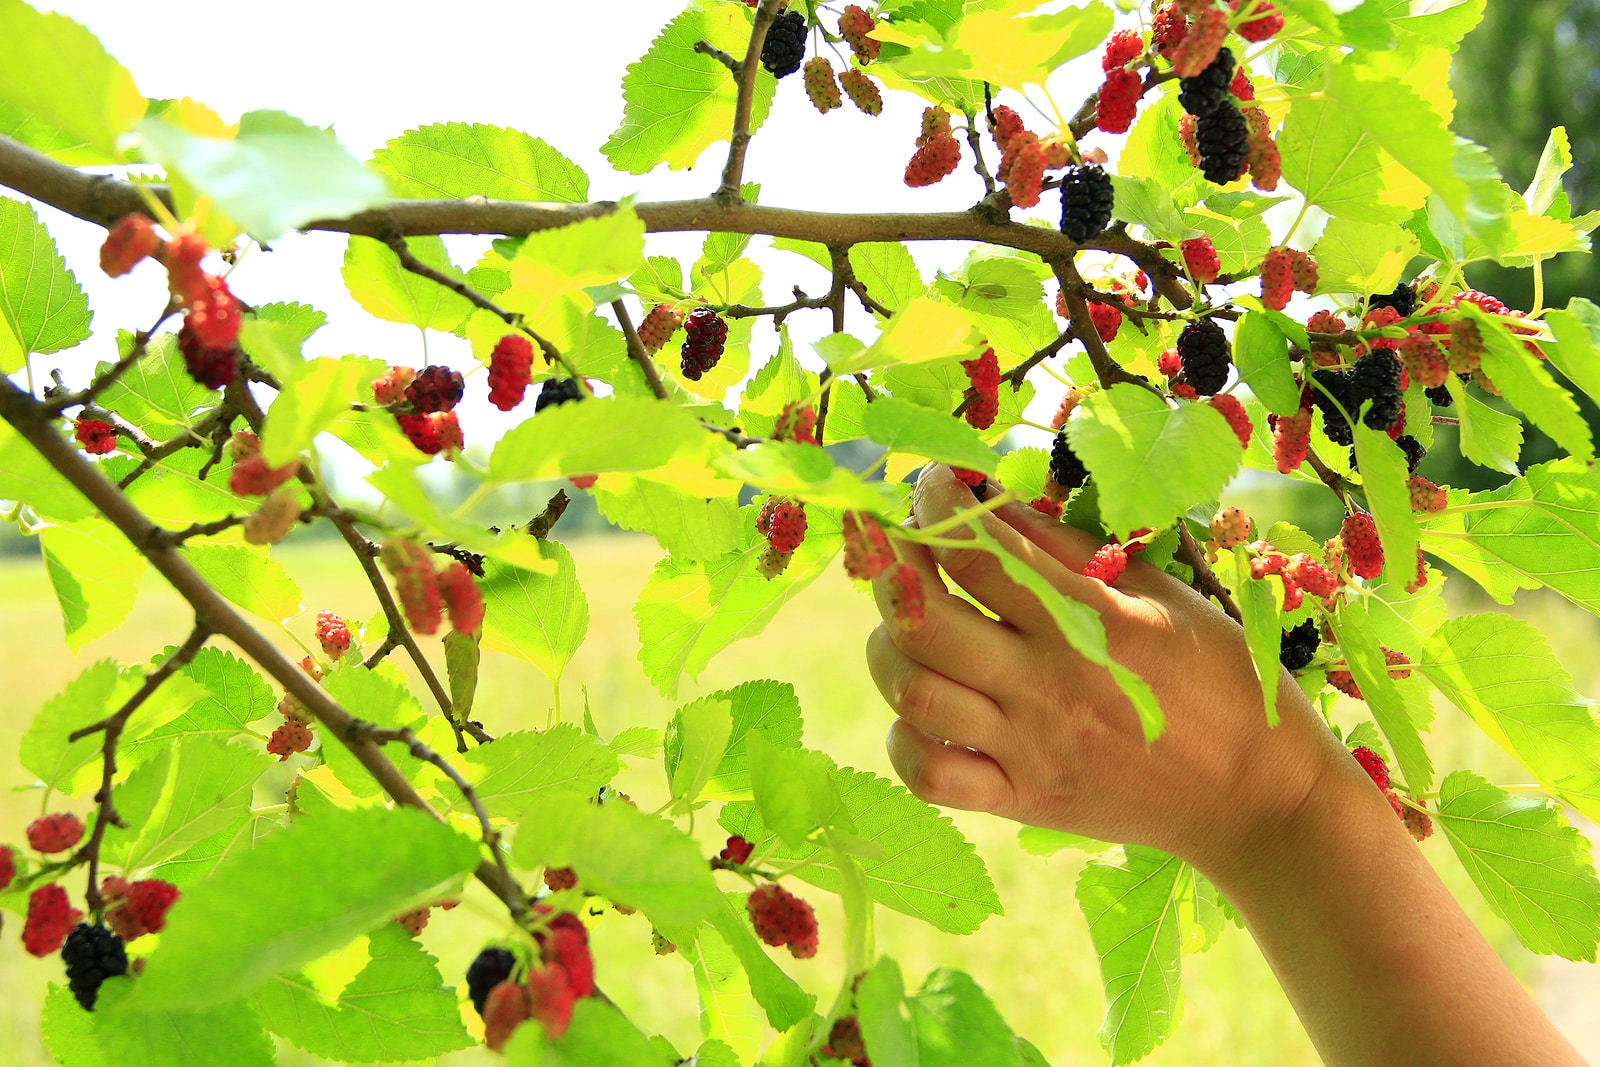 Female hand plucking ripe mulberry from tree. Berries of mulberry. Mulberry tree with ripe berries. Collecting crop of sweet berries hanging on tree